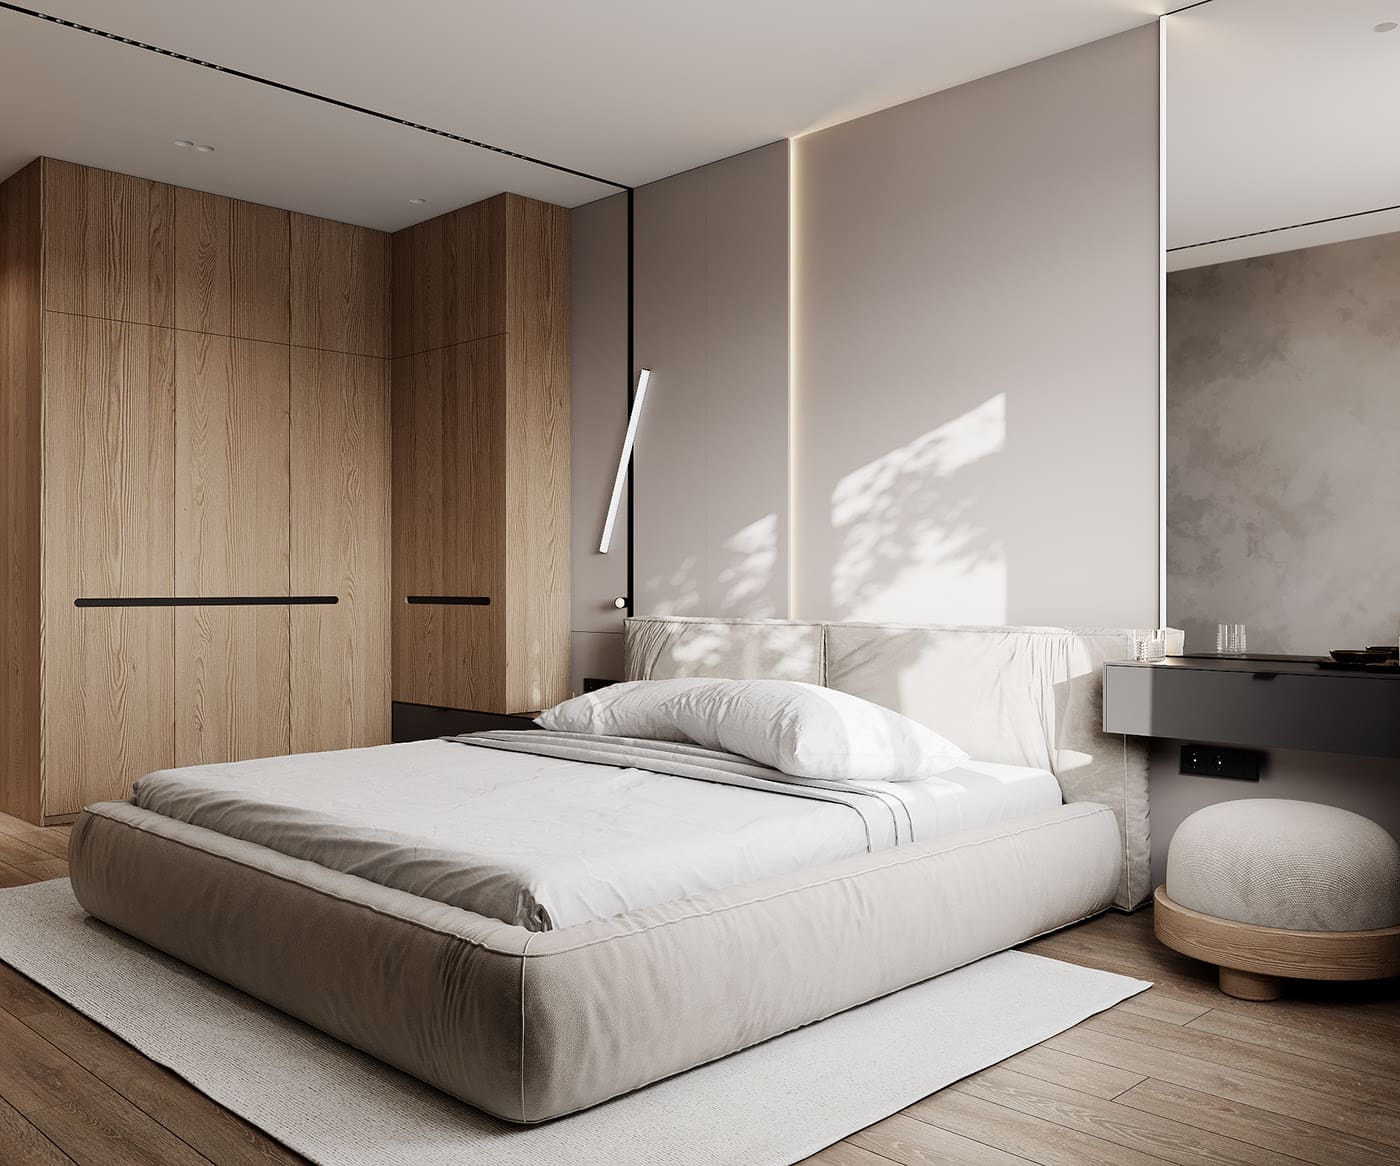 Laconic apartment in the style of minimalism, bedroom, photo 20